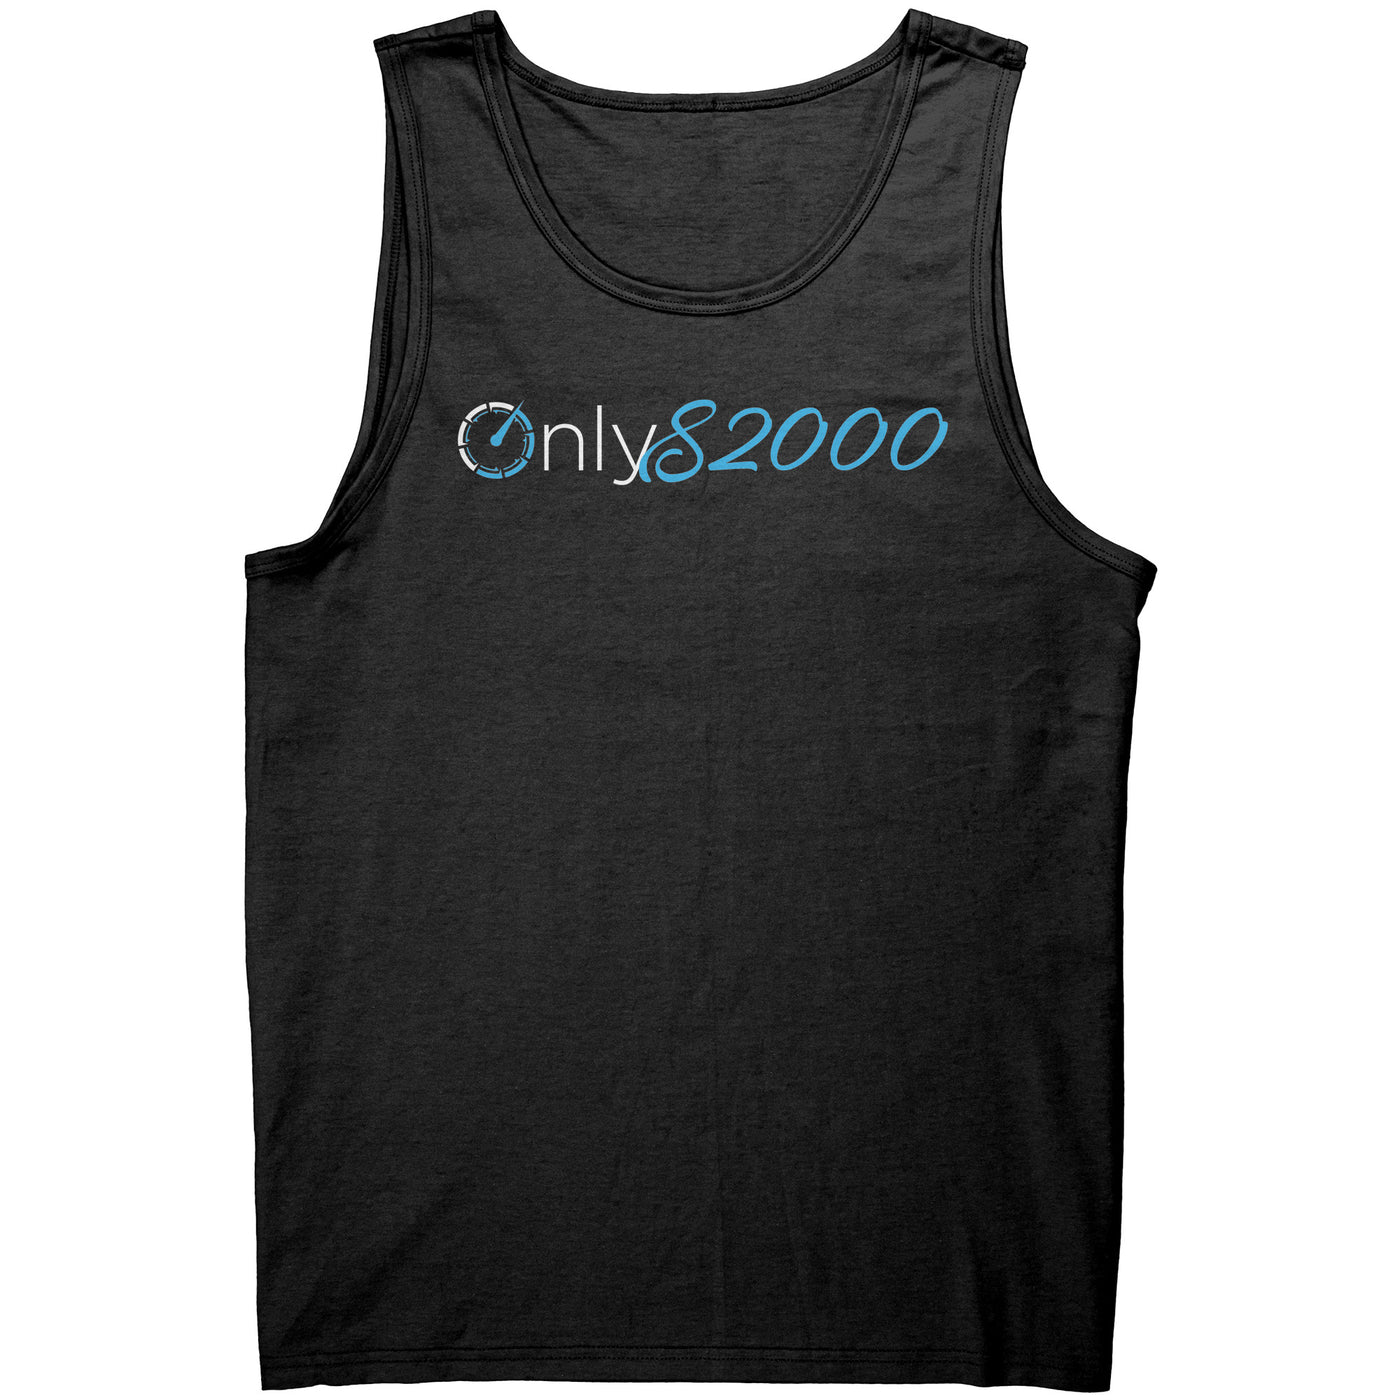 Only S2000 Mens Tank